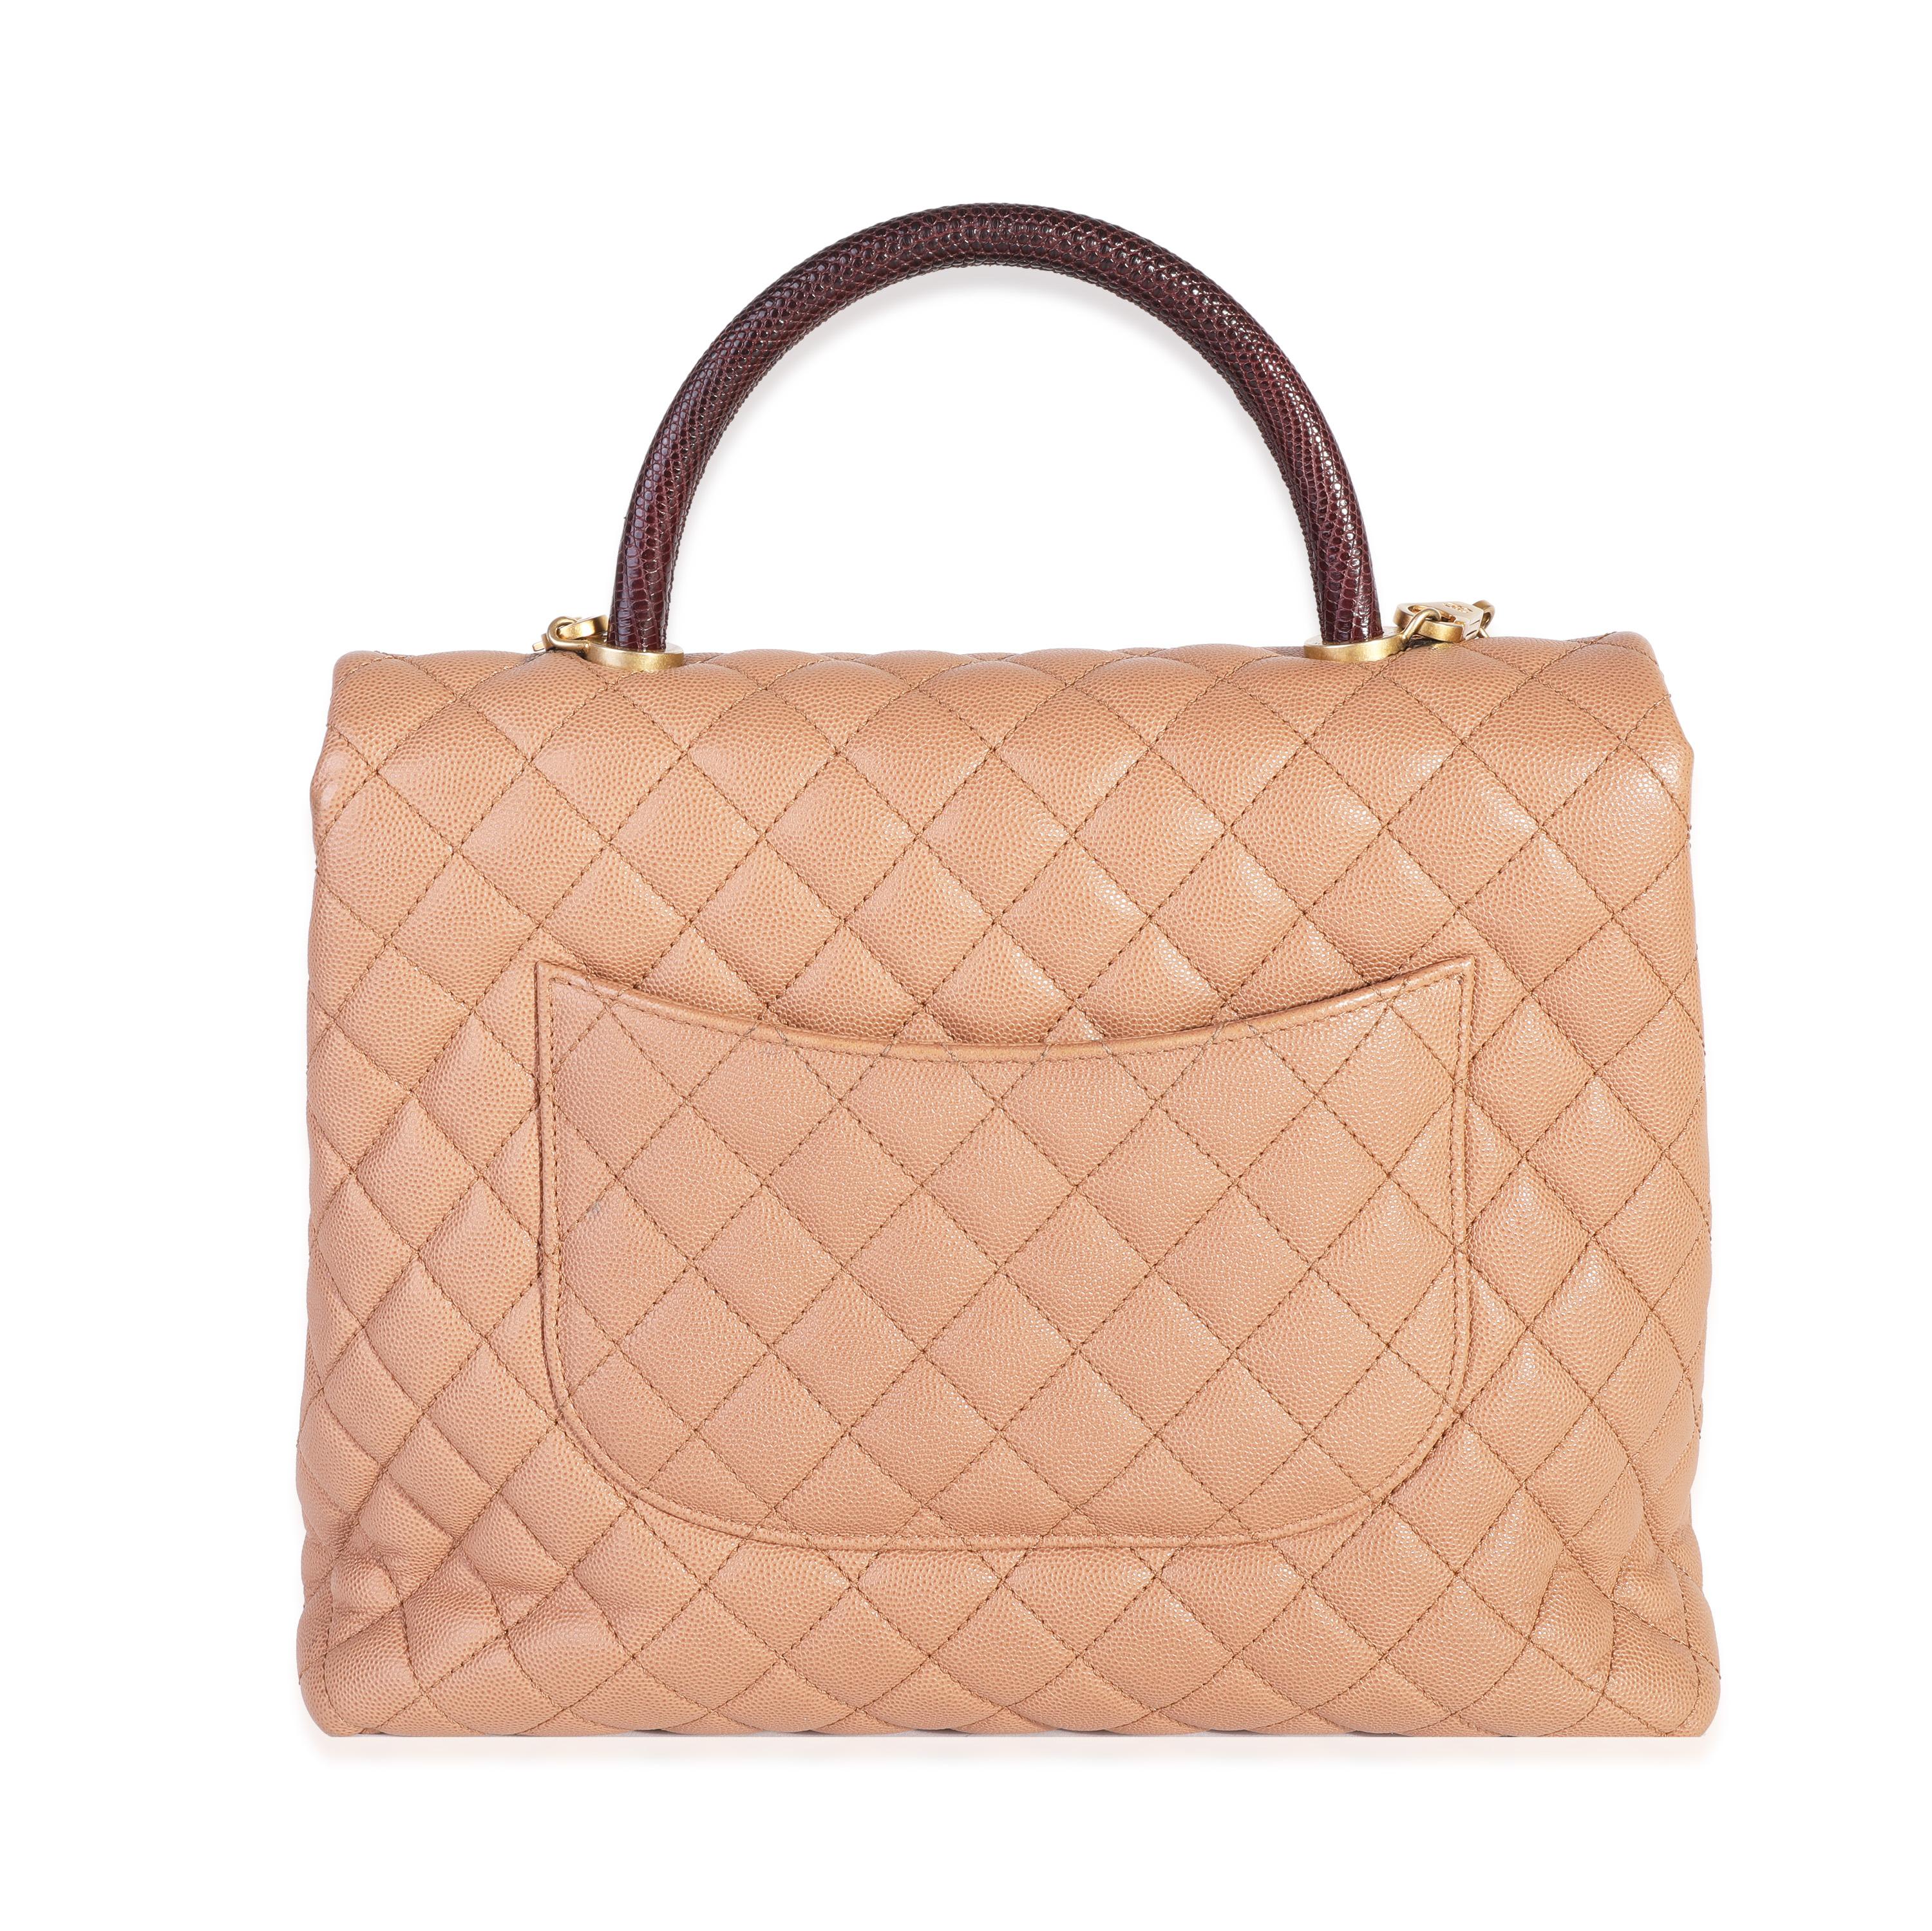 Help!!! I got color transfer on my Chanel Deauville light pink canvas tote,  and my sales advisor said their repair team can't do anything to help. Does  anyone have any suggestions? The